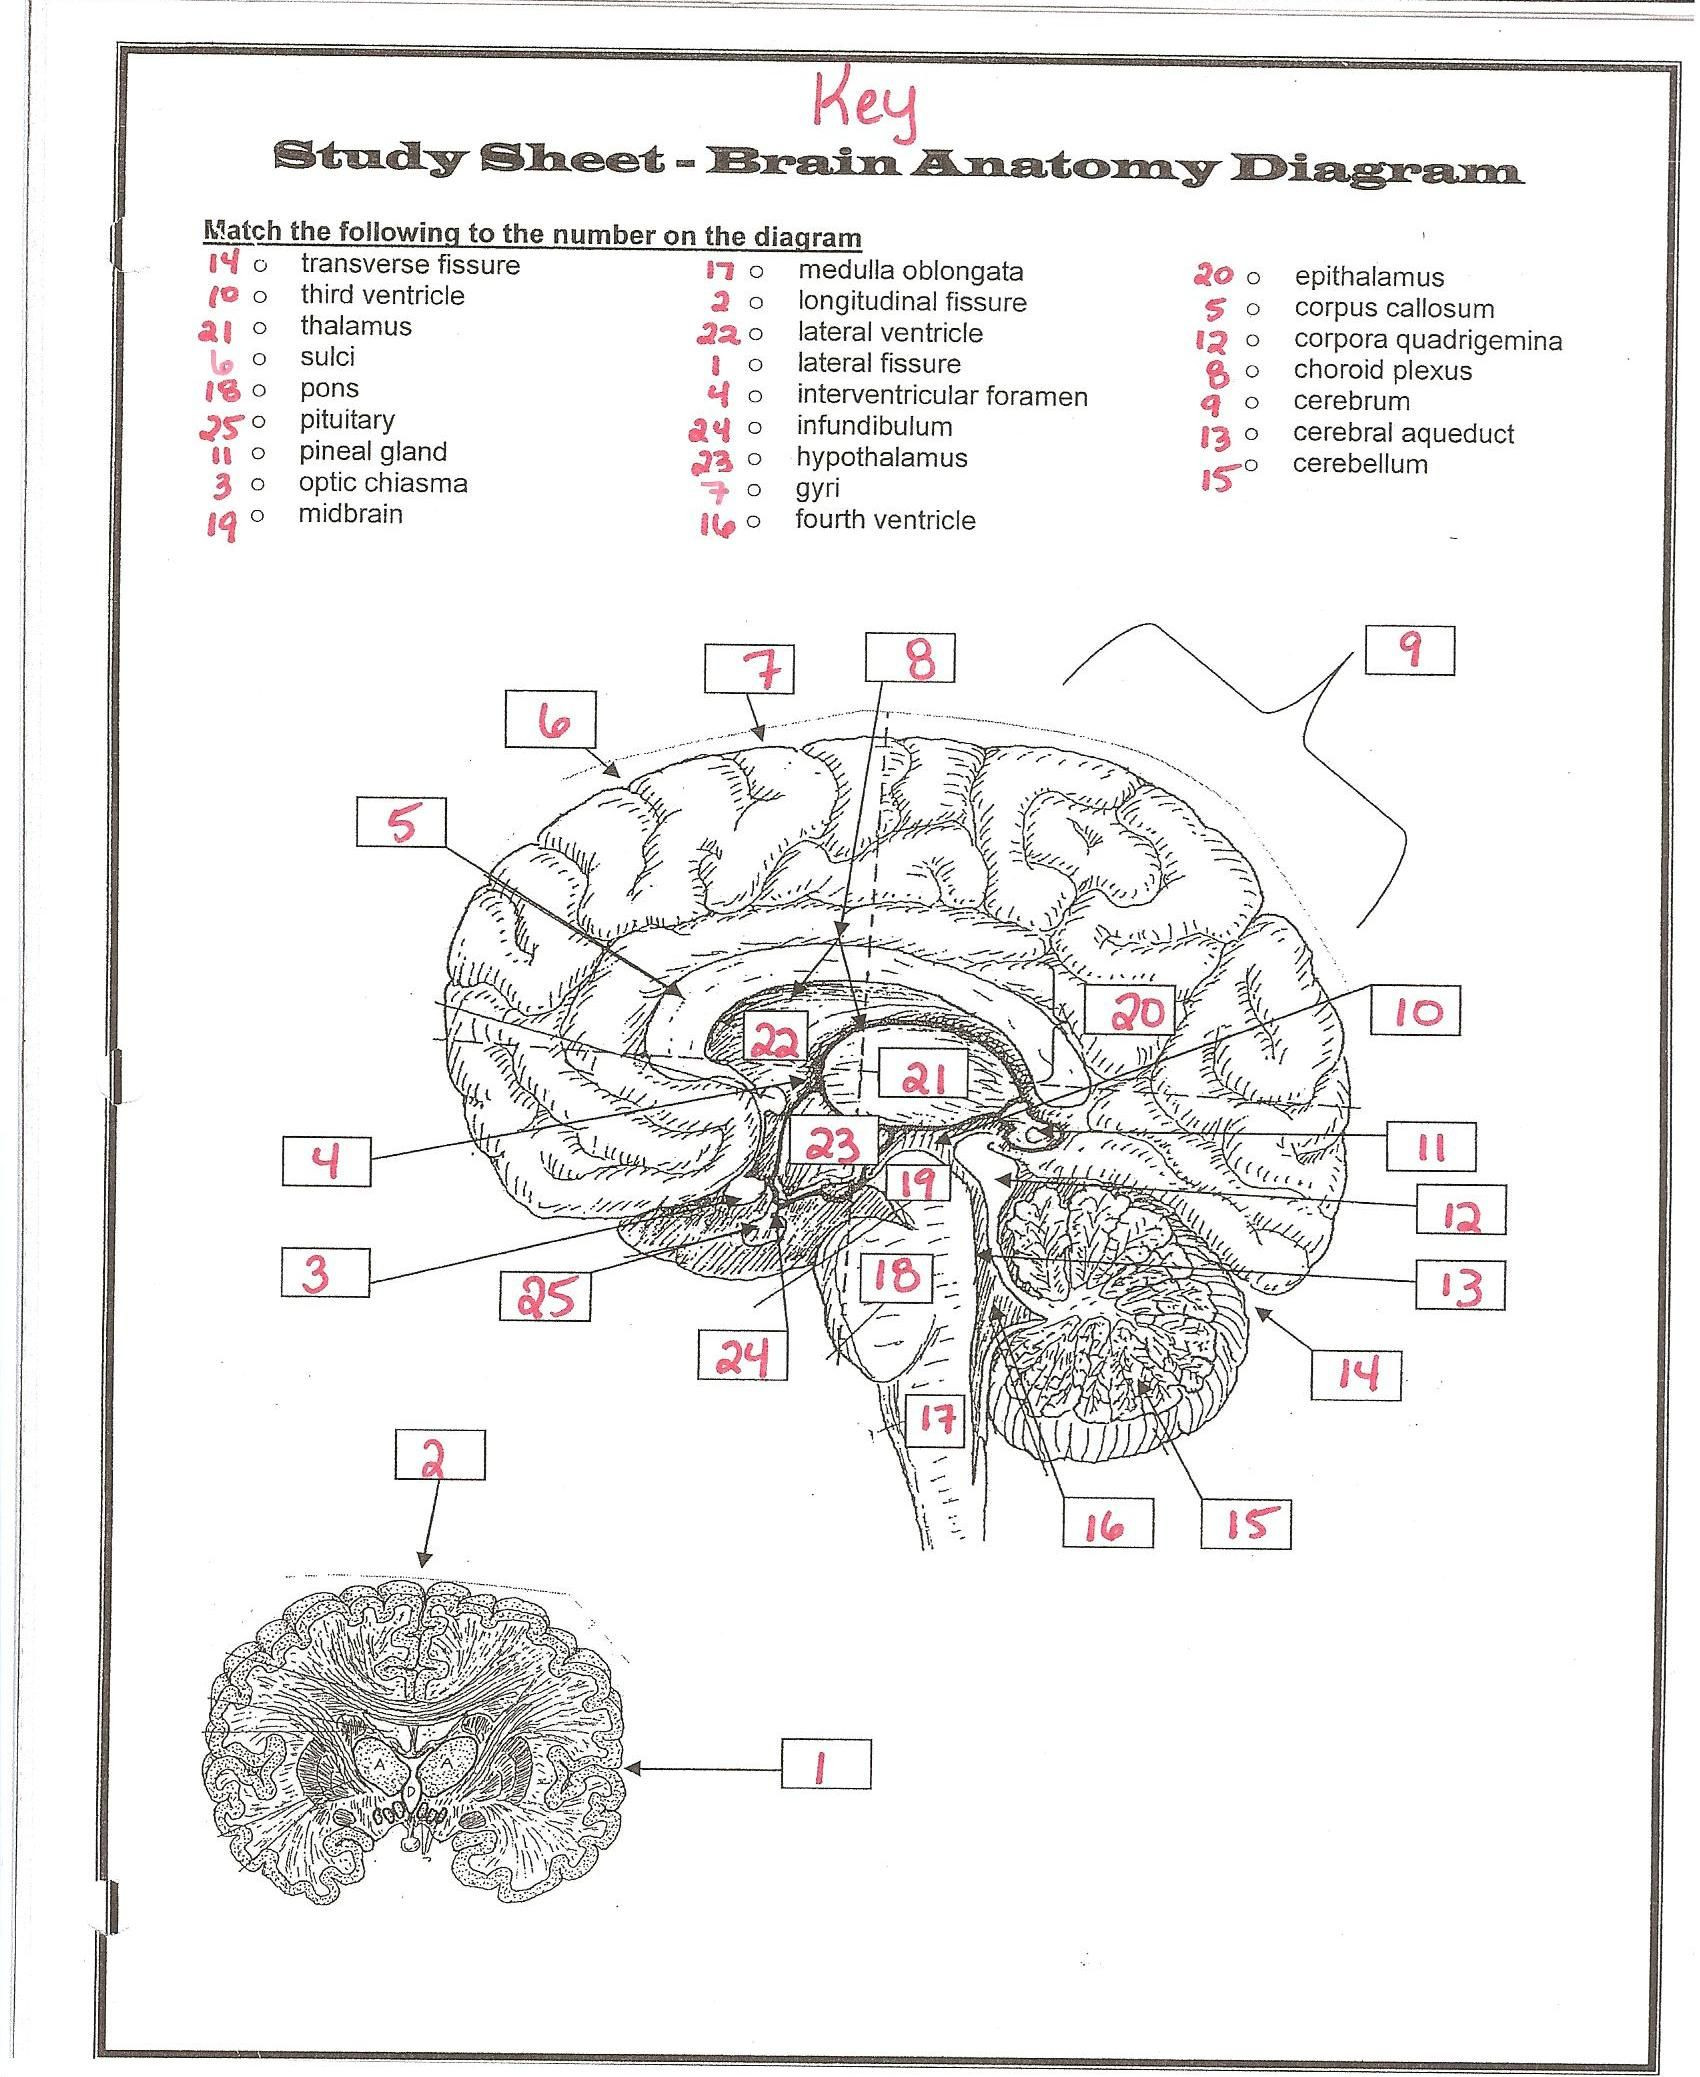 Nervous System Worksheet High School Anatomy the Brain Questions Quiz Answers